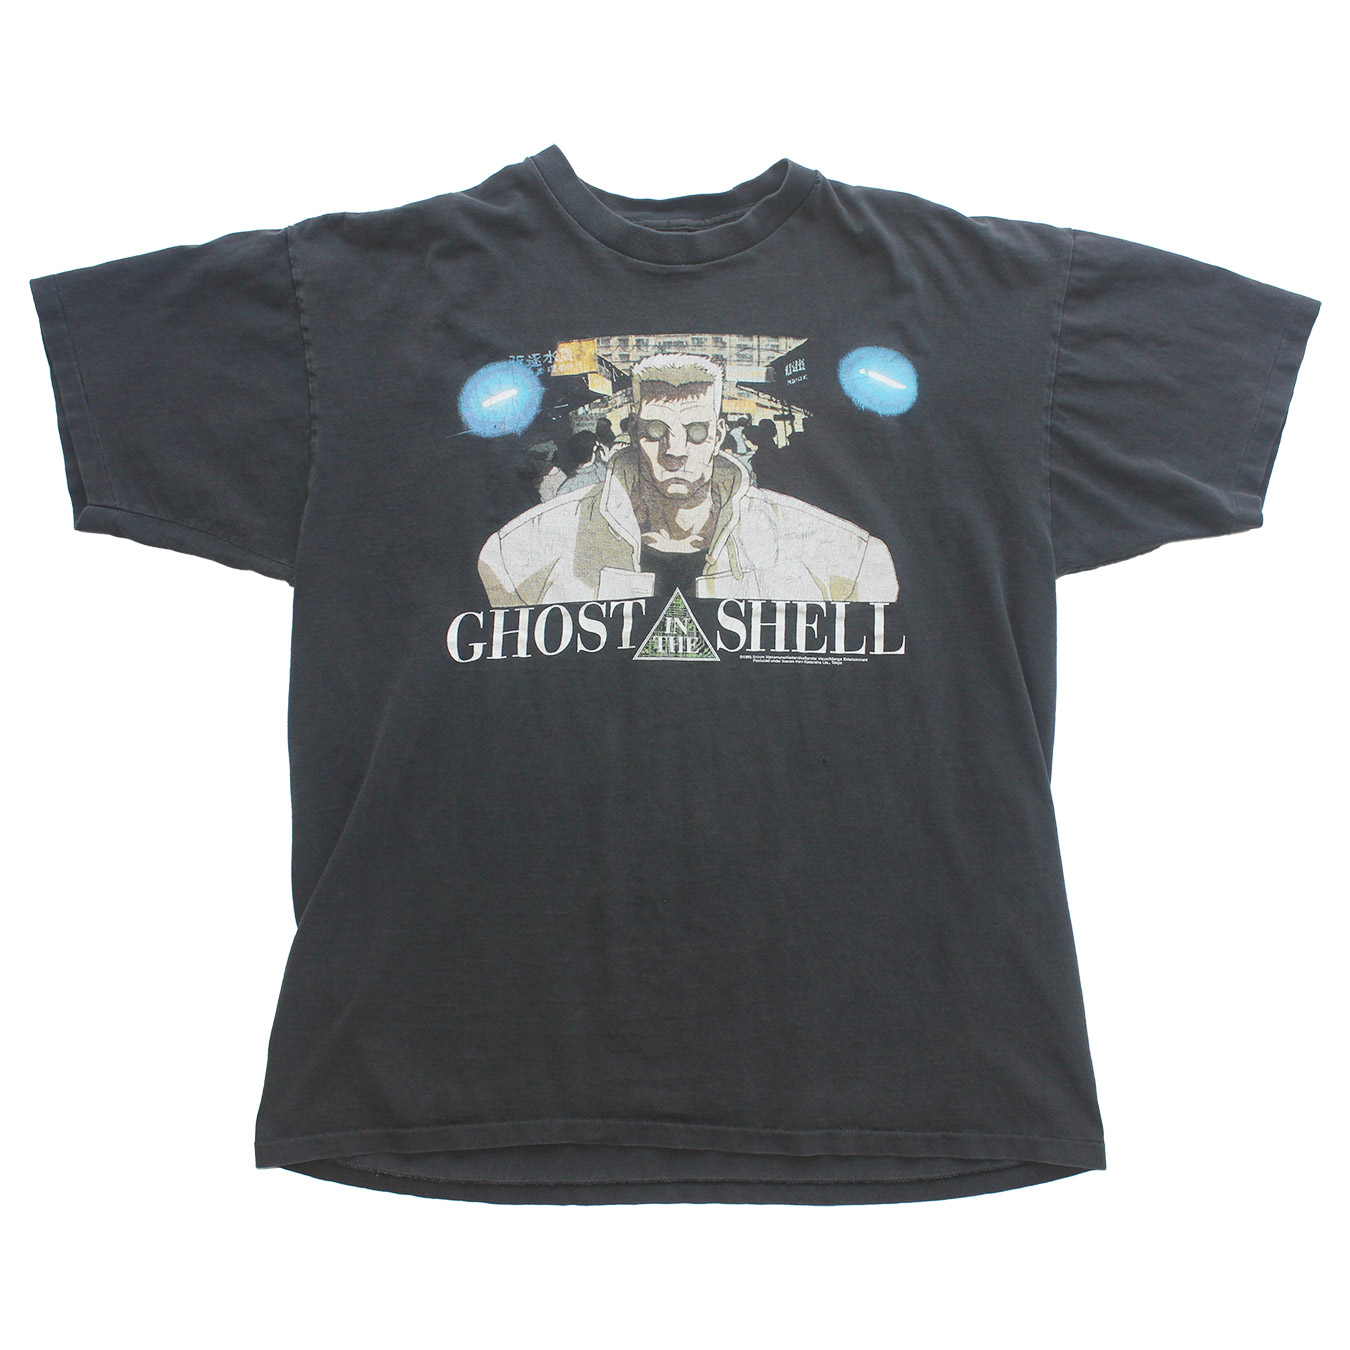 Vintage Ghost in the Shell Movie T-shirt featuring Batou, Front